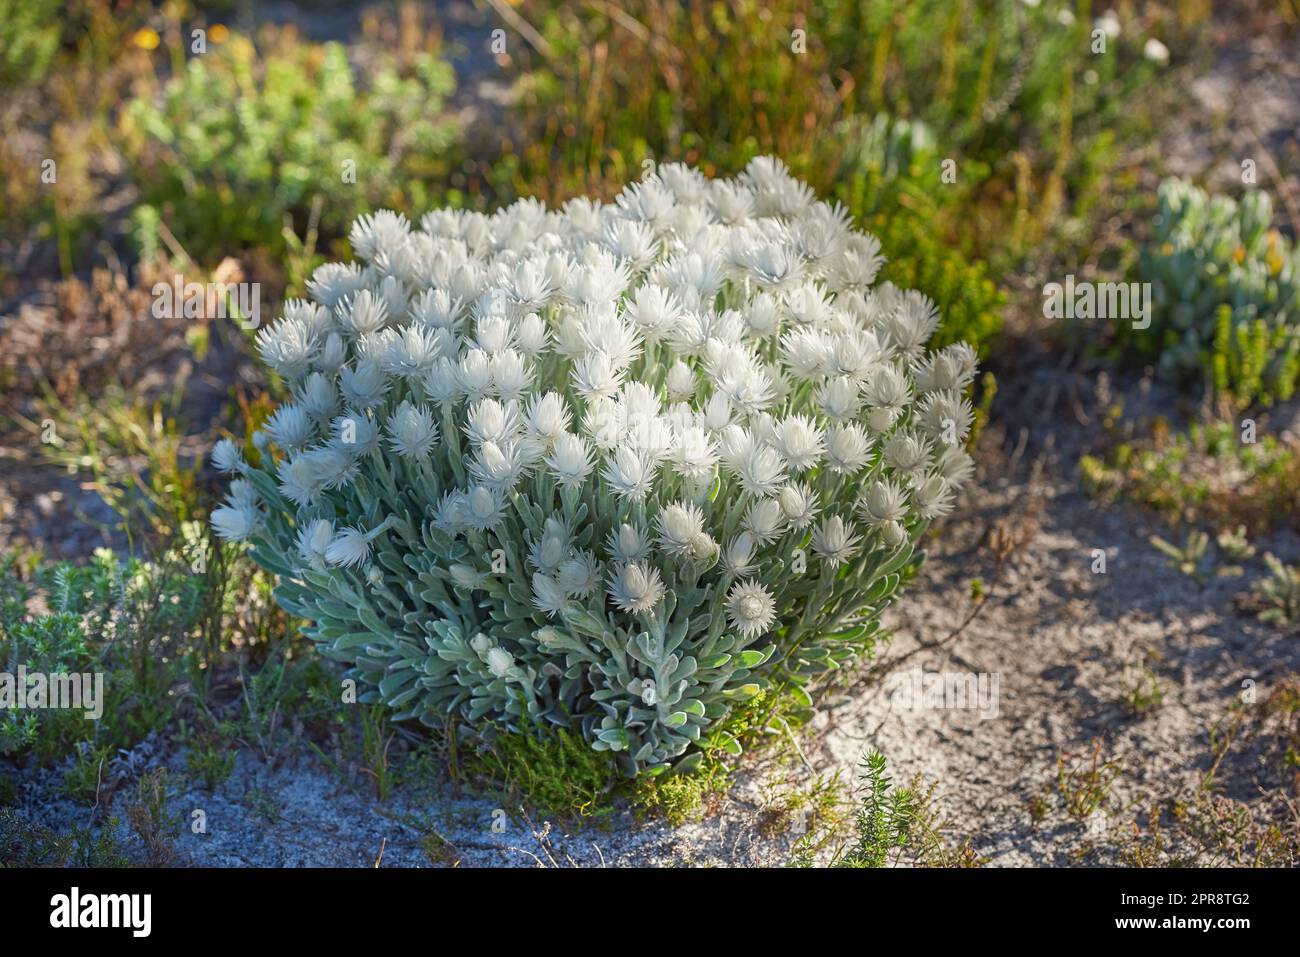 White everlastings, or syncarpha, growing outside in their natural habitat. Plant life and vegetation growing and thriving on mountain terrain in a lucious and protected nature conservation area Stock Photo